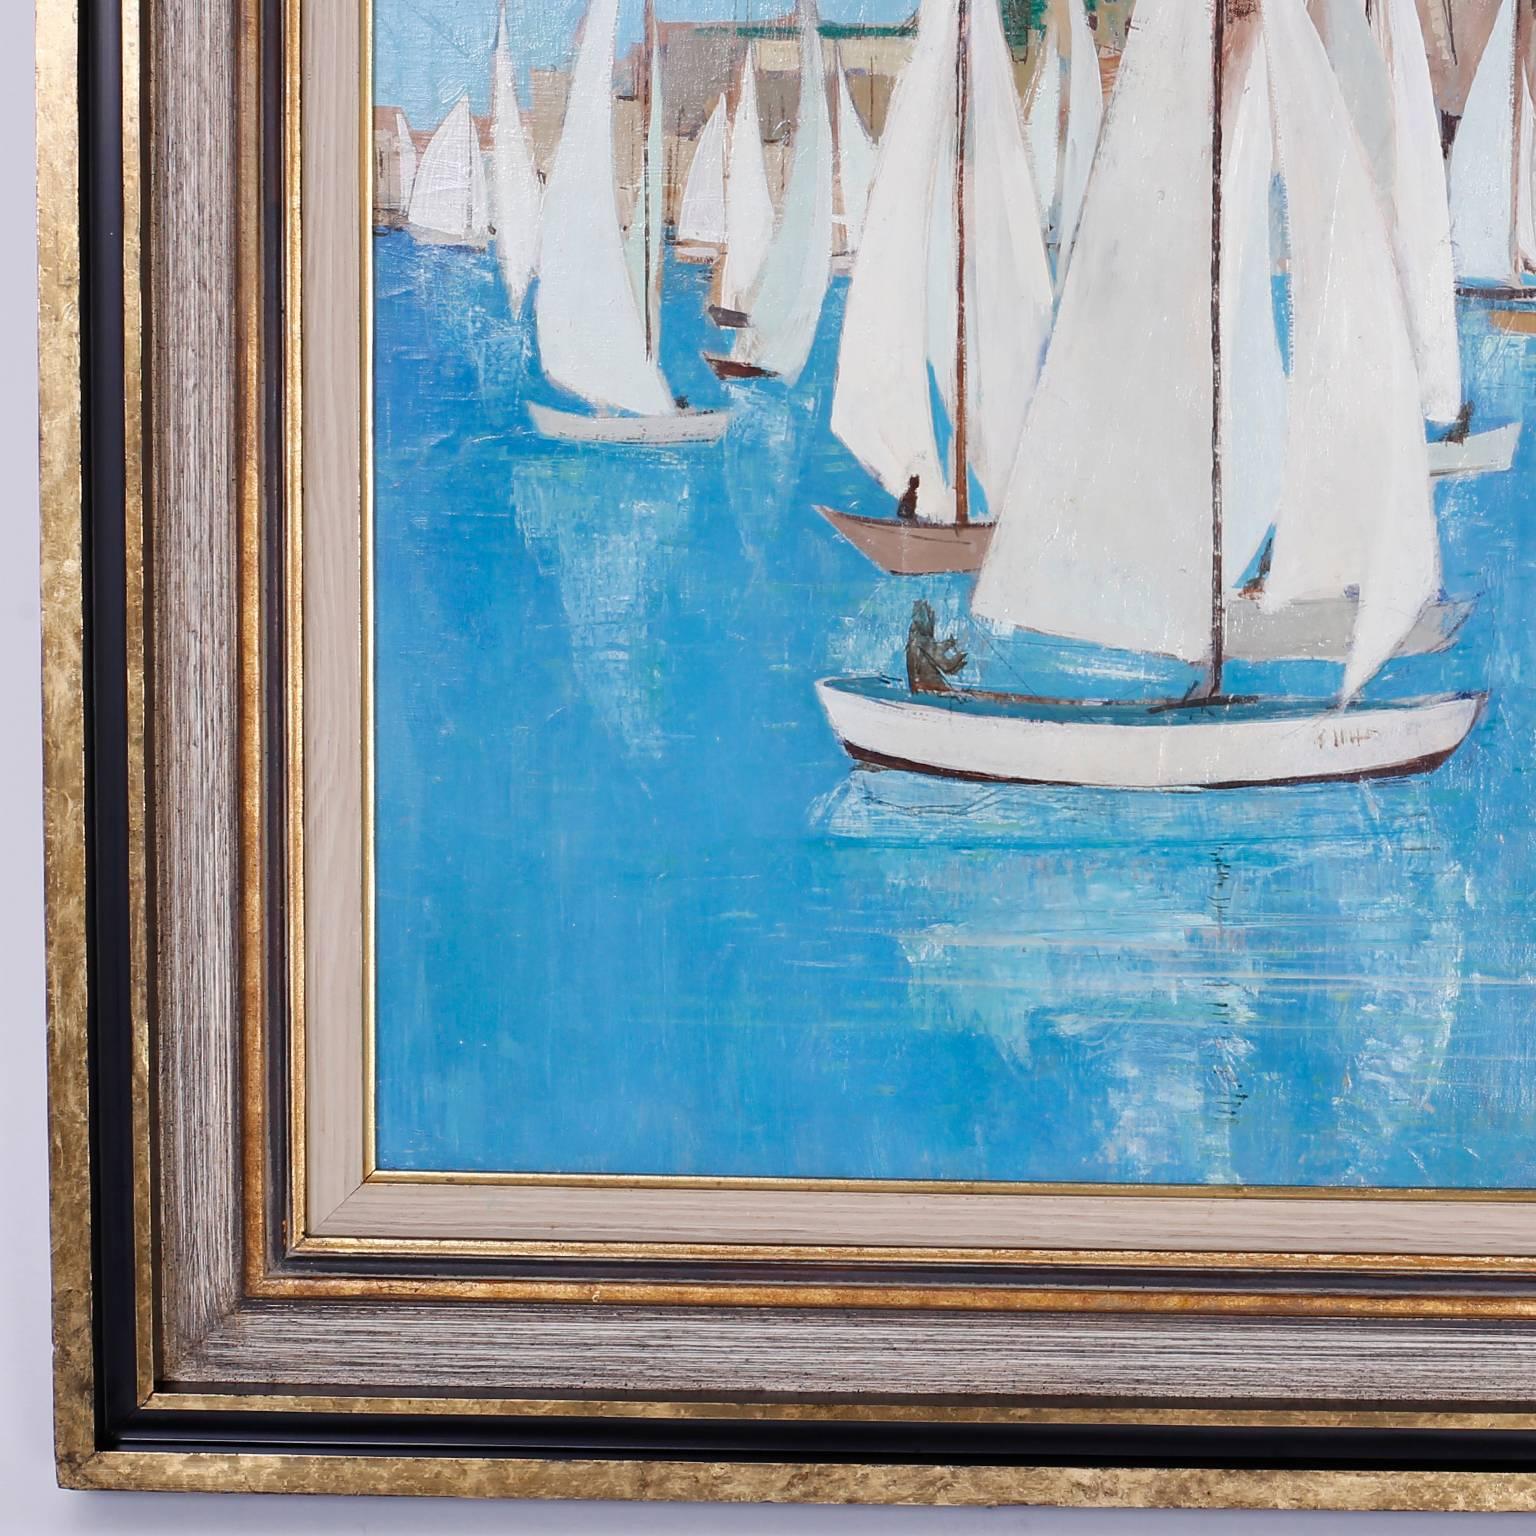 20th Century Mid-Century Modern Oil Painting on Canvas Depicting a Sailboat Race